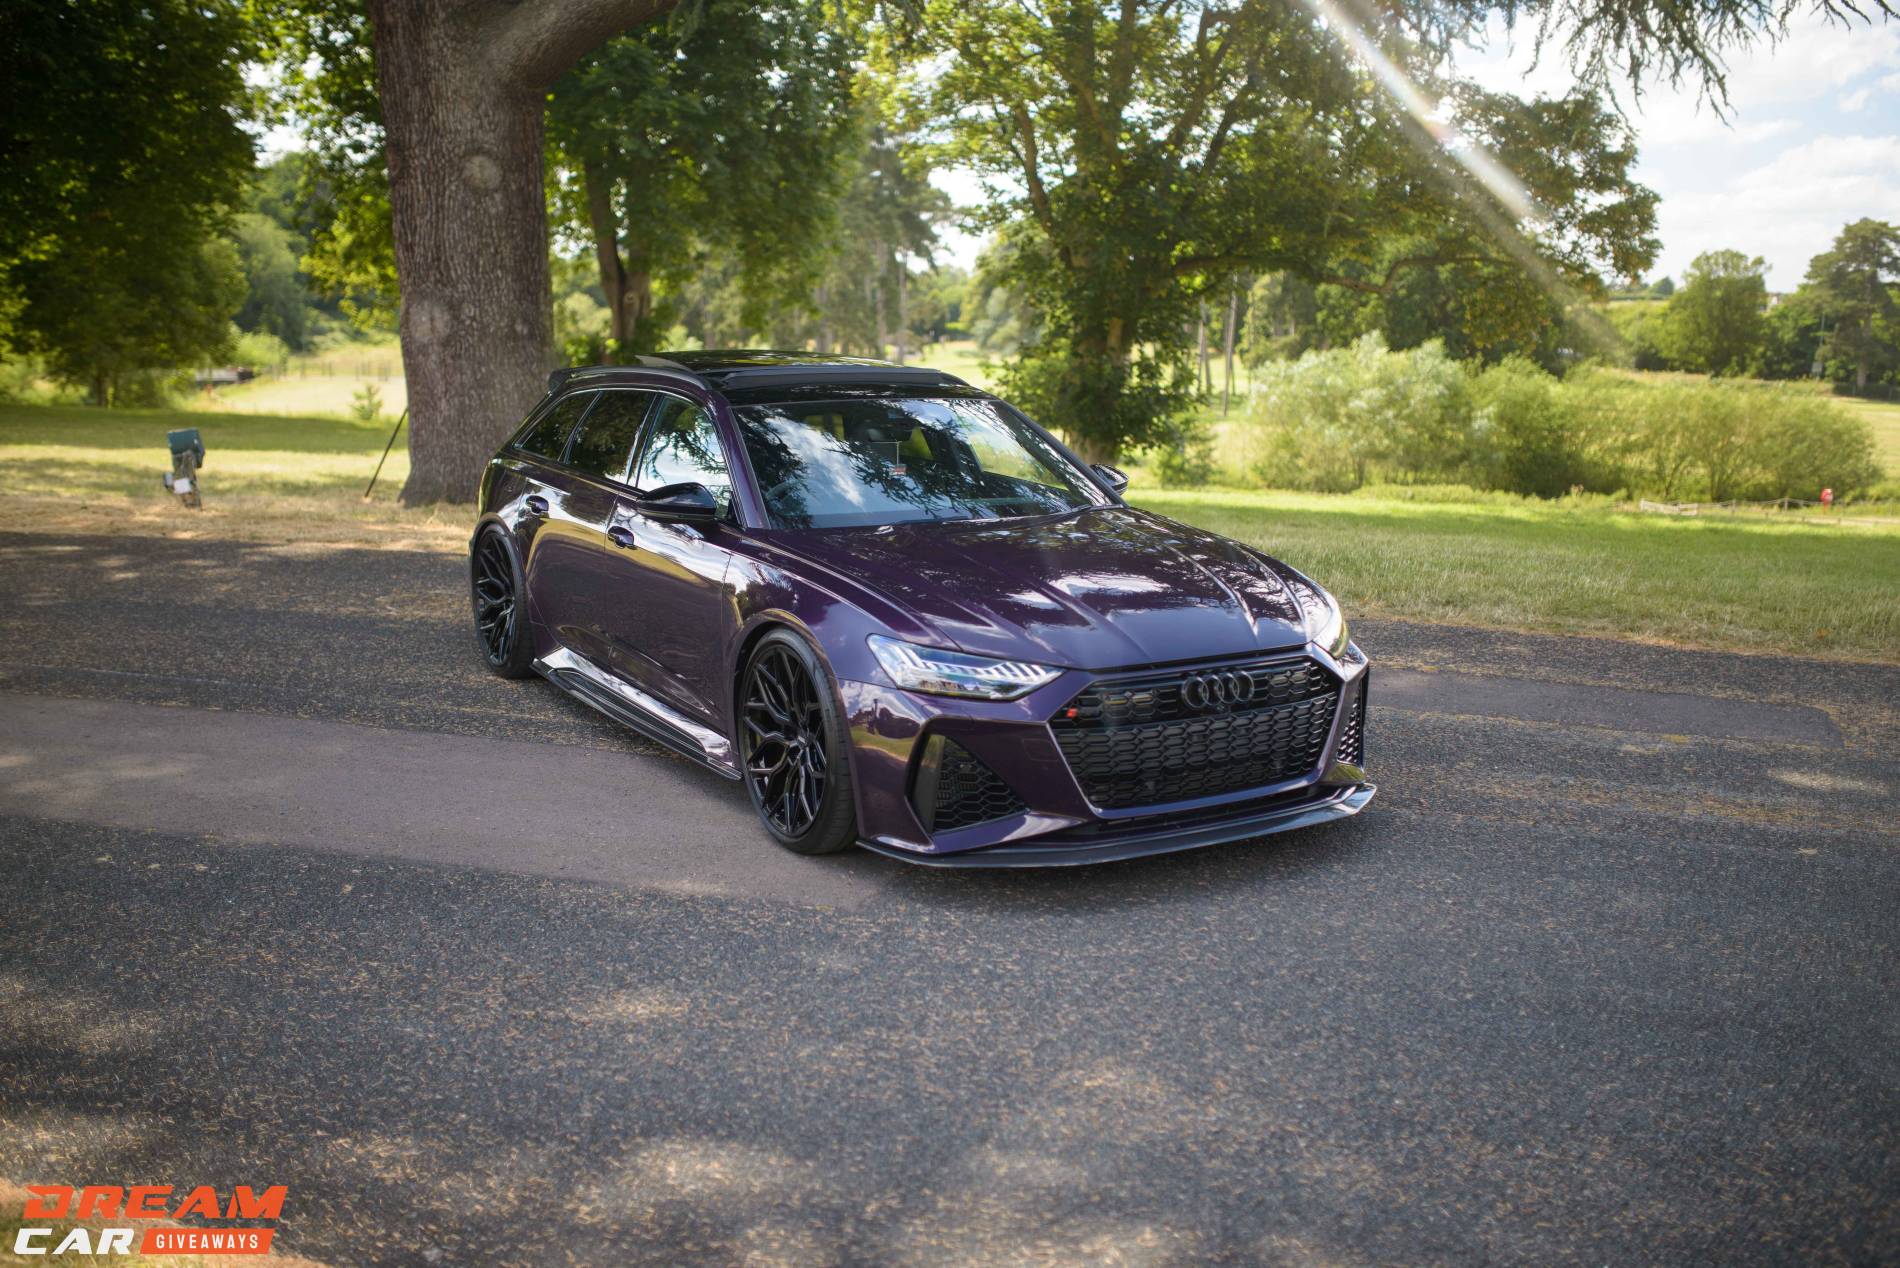 2021 Audi RS6 Carbon Black & £2,000 OR £80,000 Tax Free